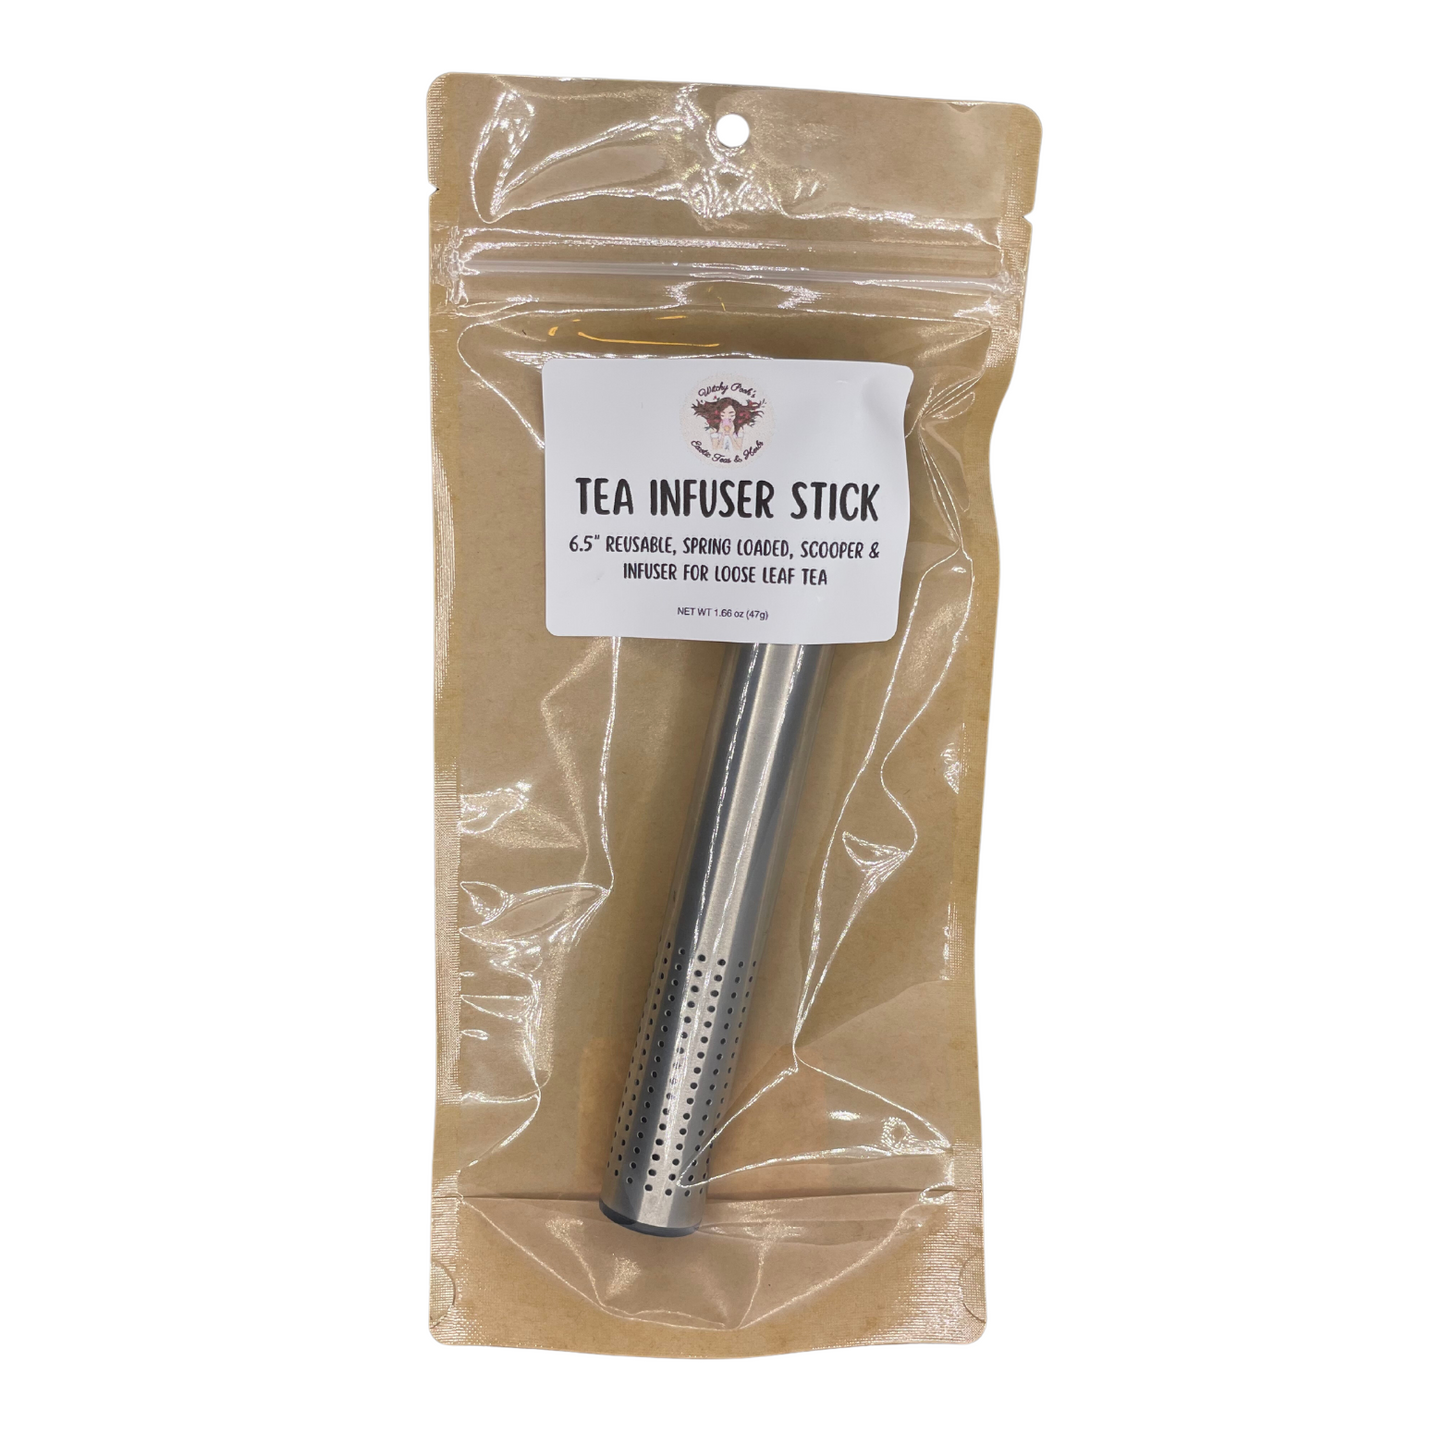 Witchy Pooh's Tea Infuser Spring Action Button Stick for Loose Leaf Tea and Herbs, Perfect for Travel, Easy to use, No Mess